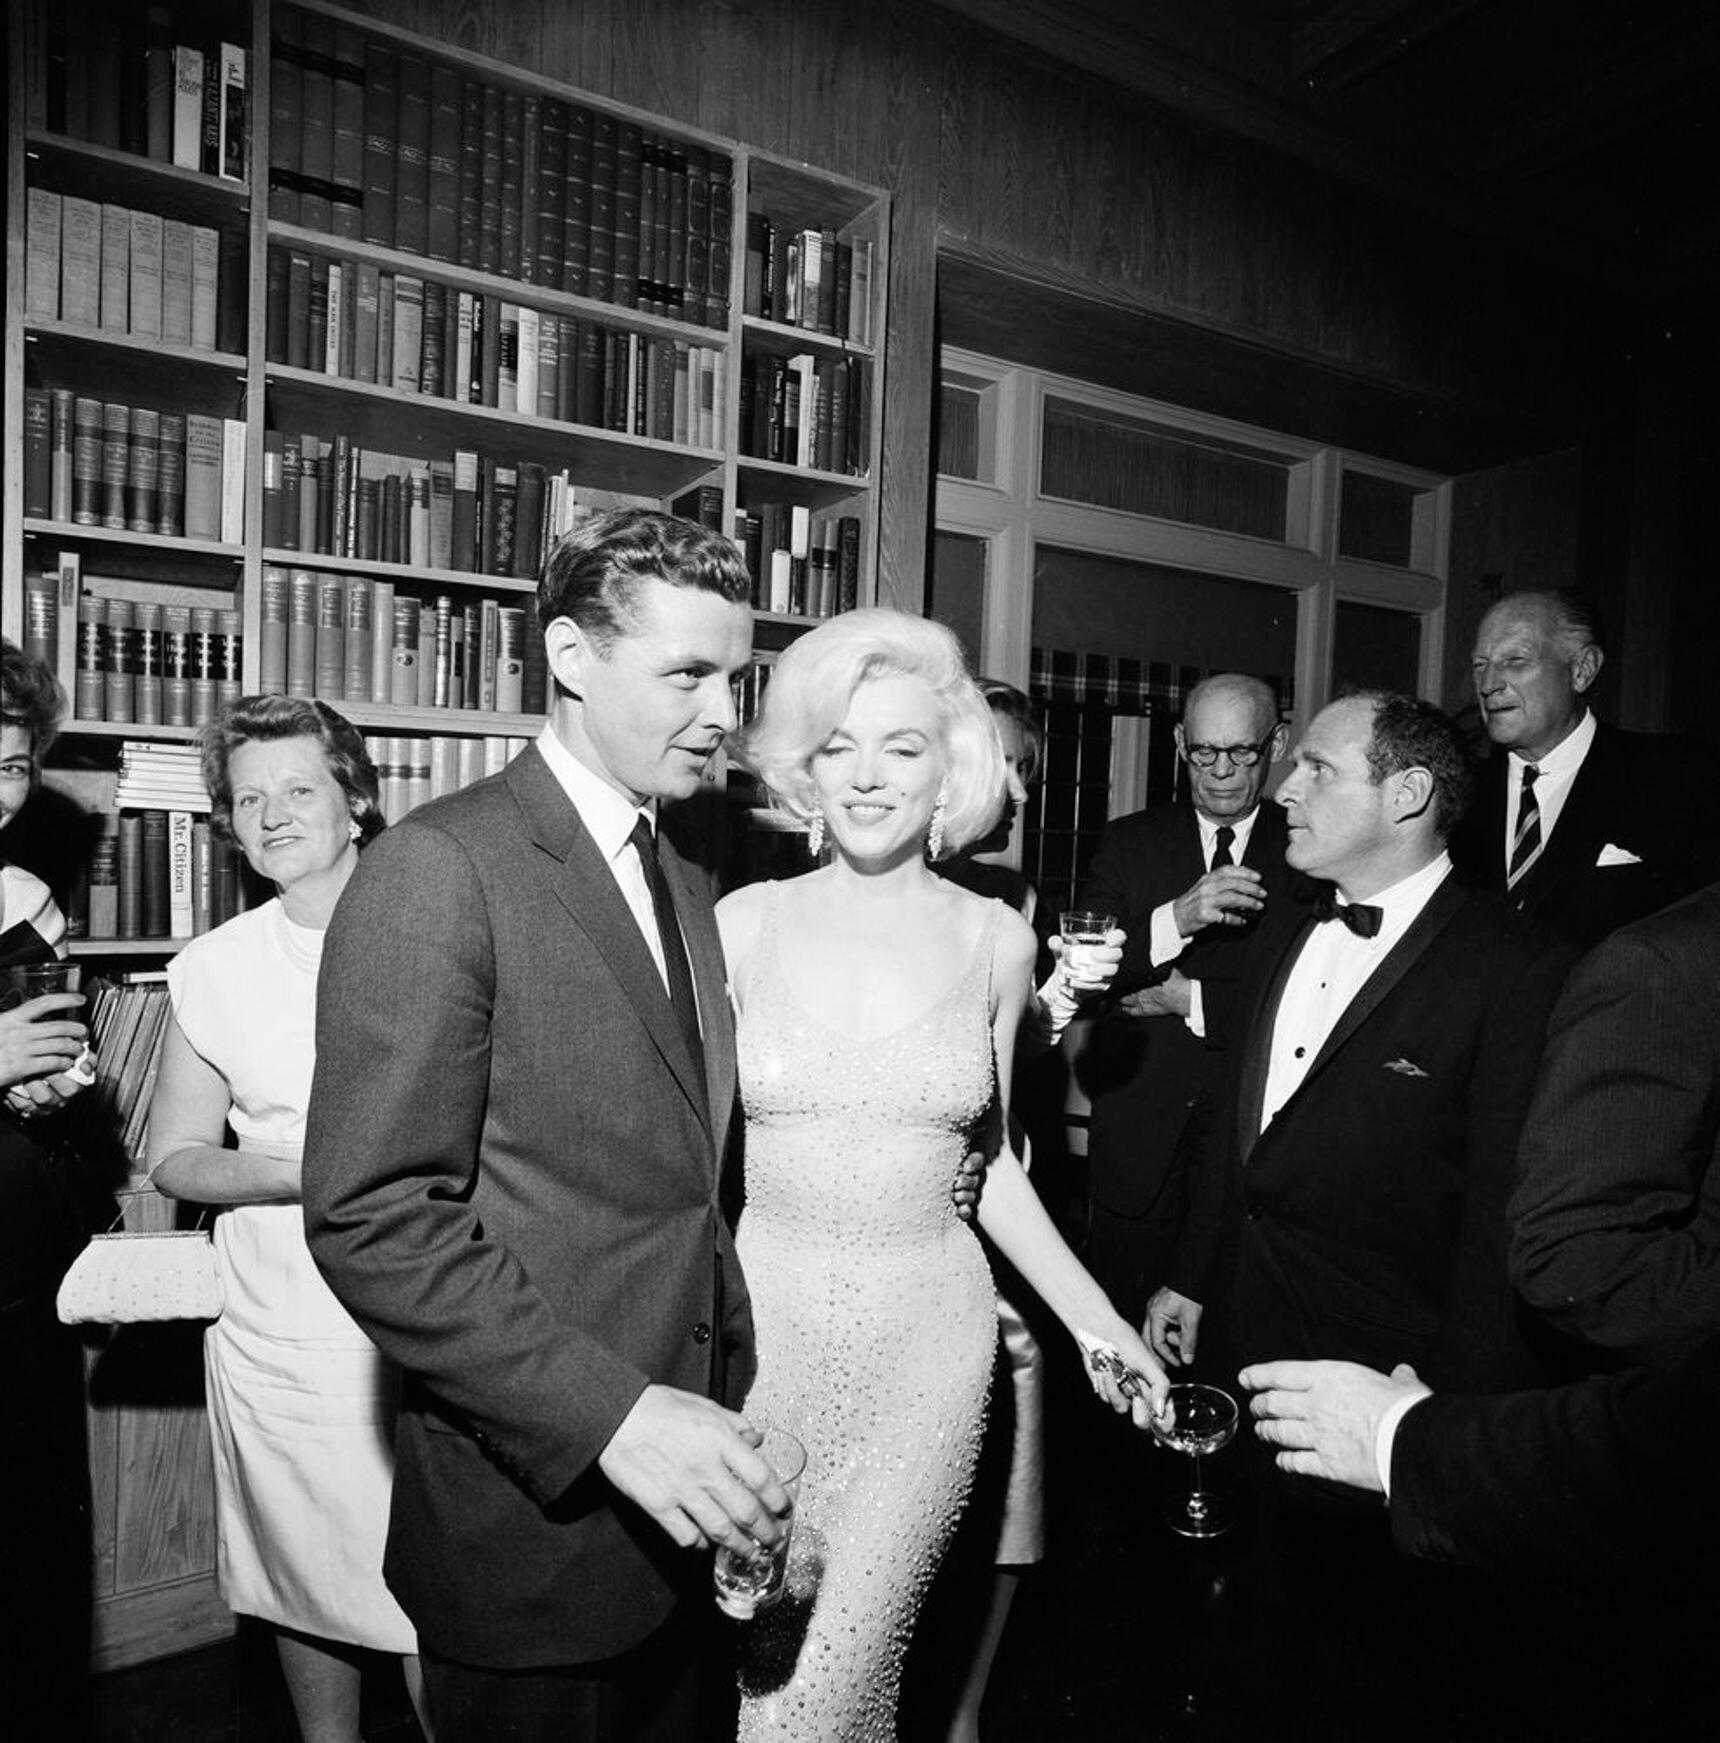 Marilyn Monroe and Steve Smith (brother-in-law of President John F. Kennedy) during an evening reception in New York, 1962